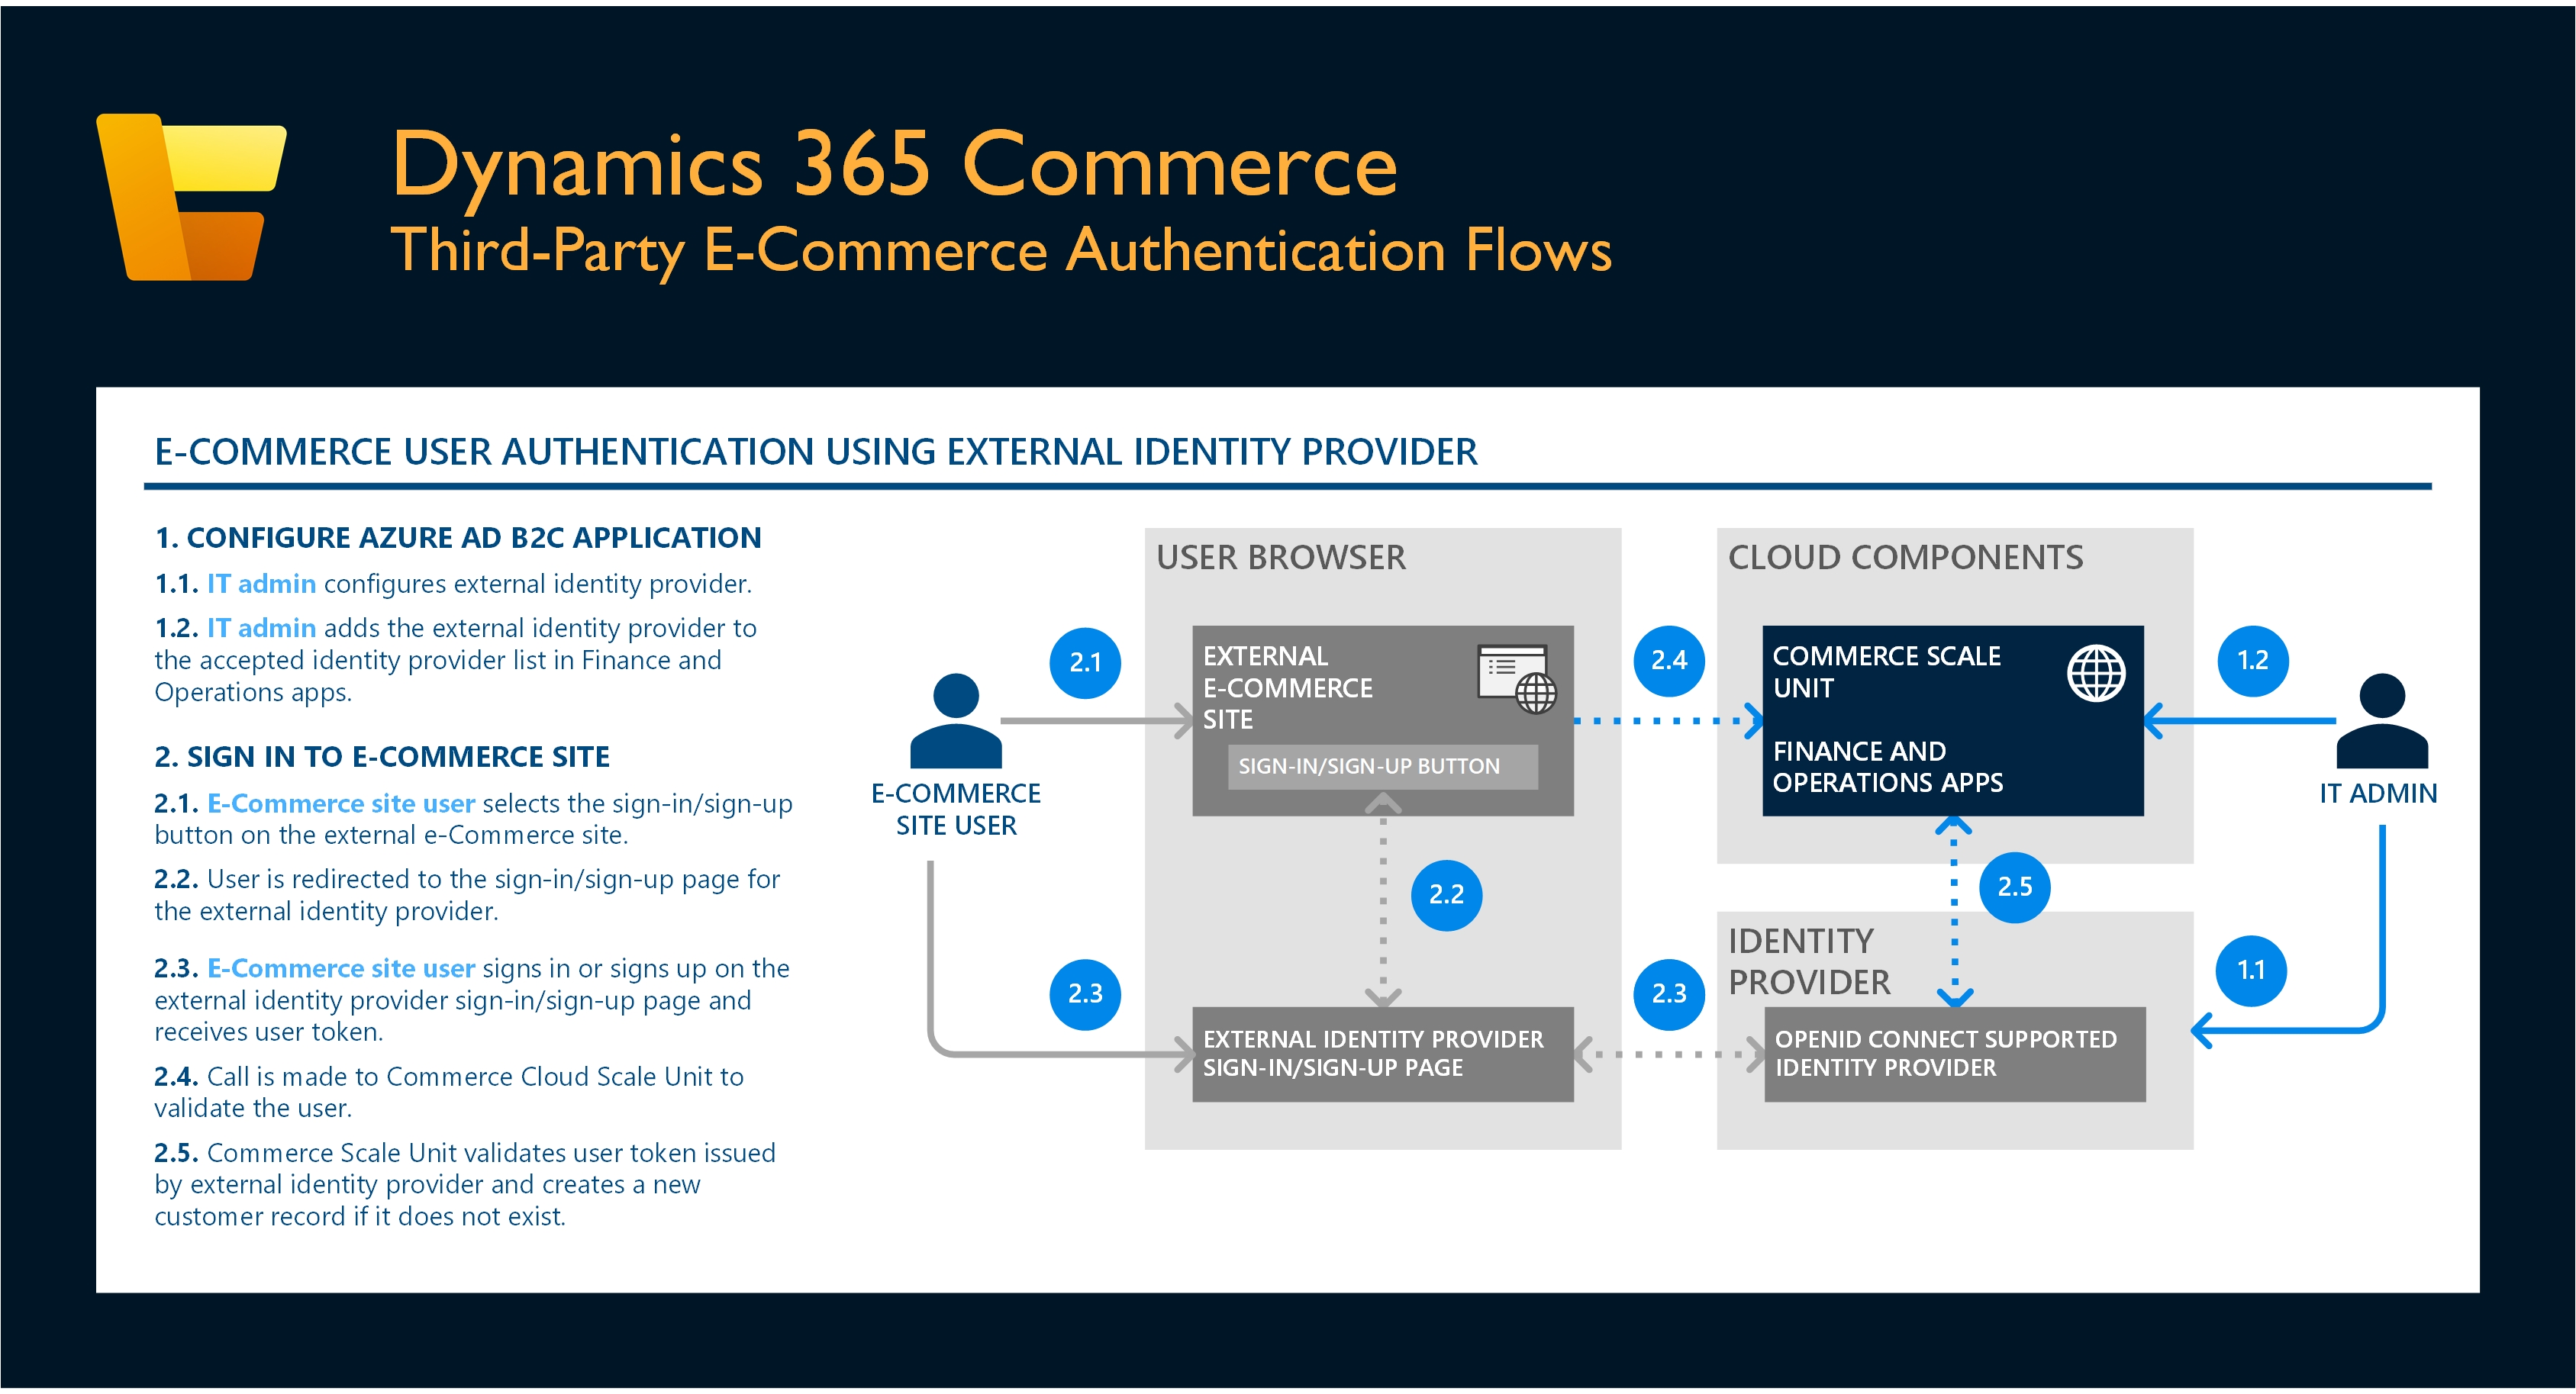 Third-party e-Commerce customer authentication flows.